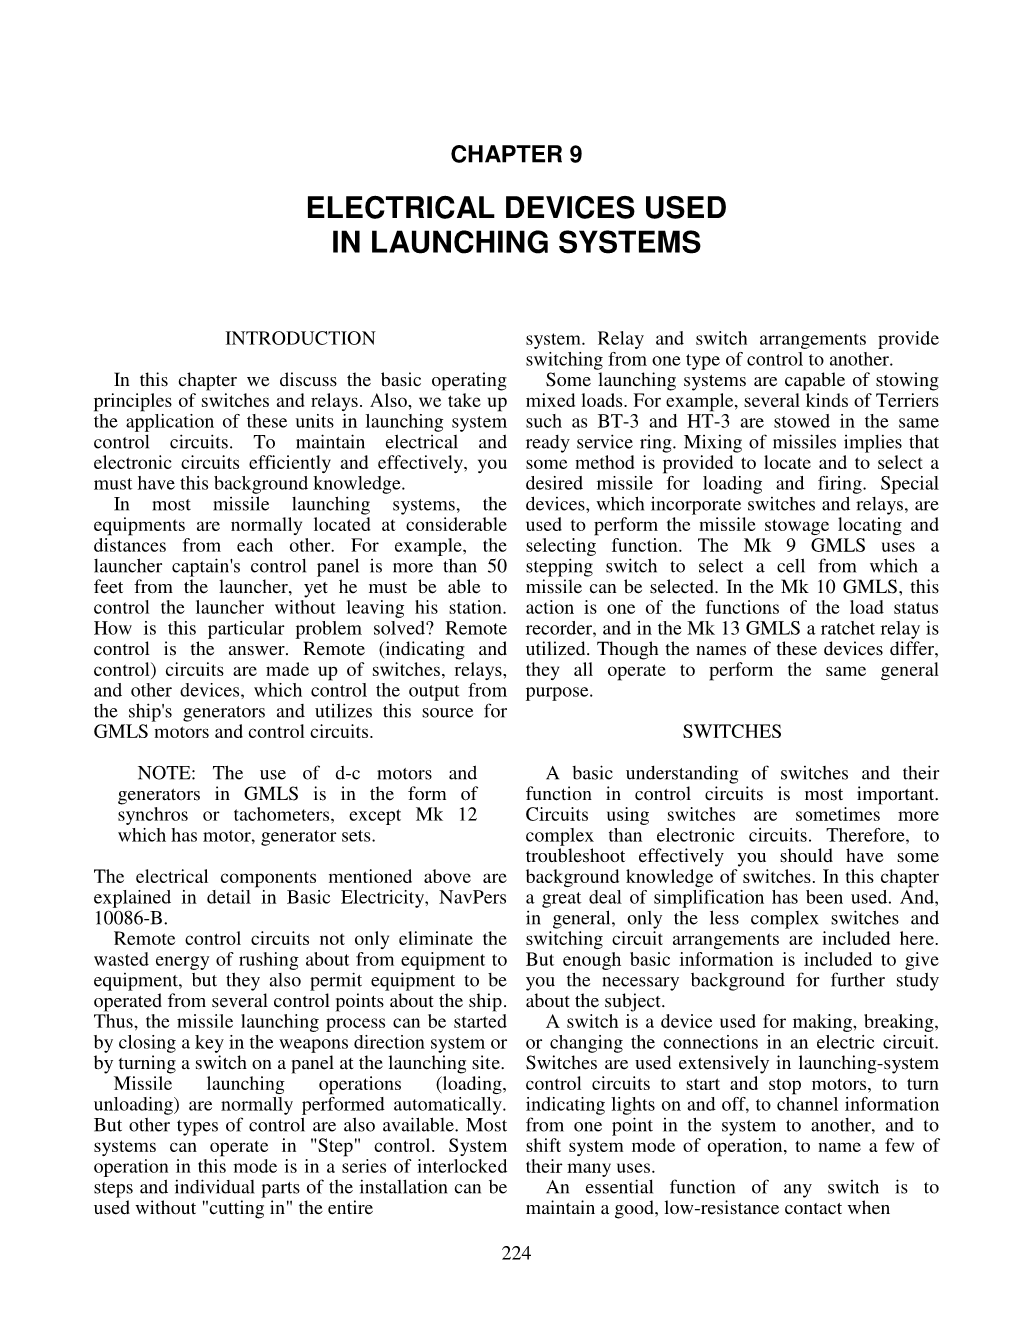 Electrical Devices Used in Launching Systems